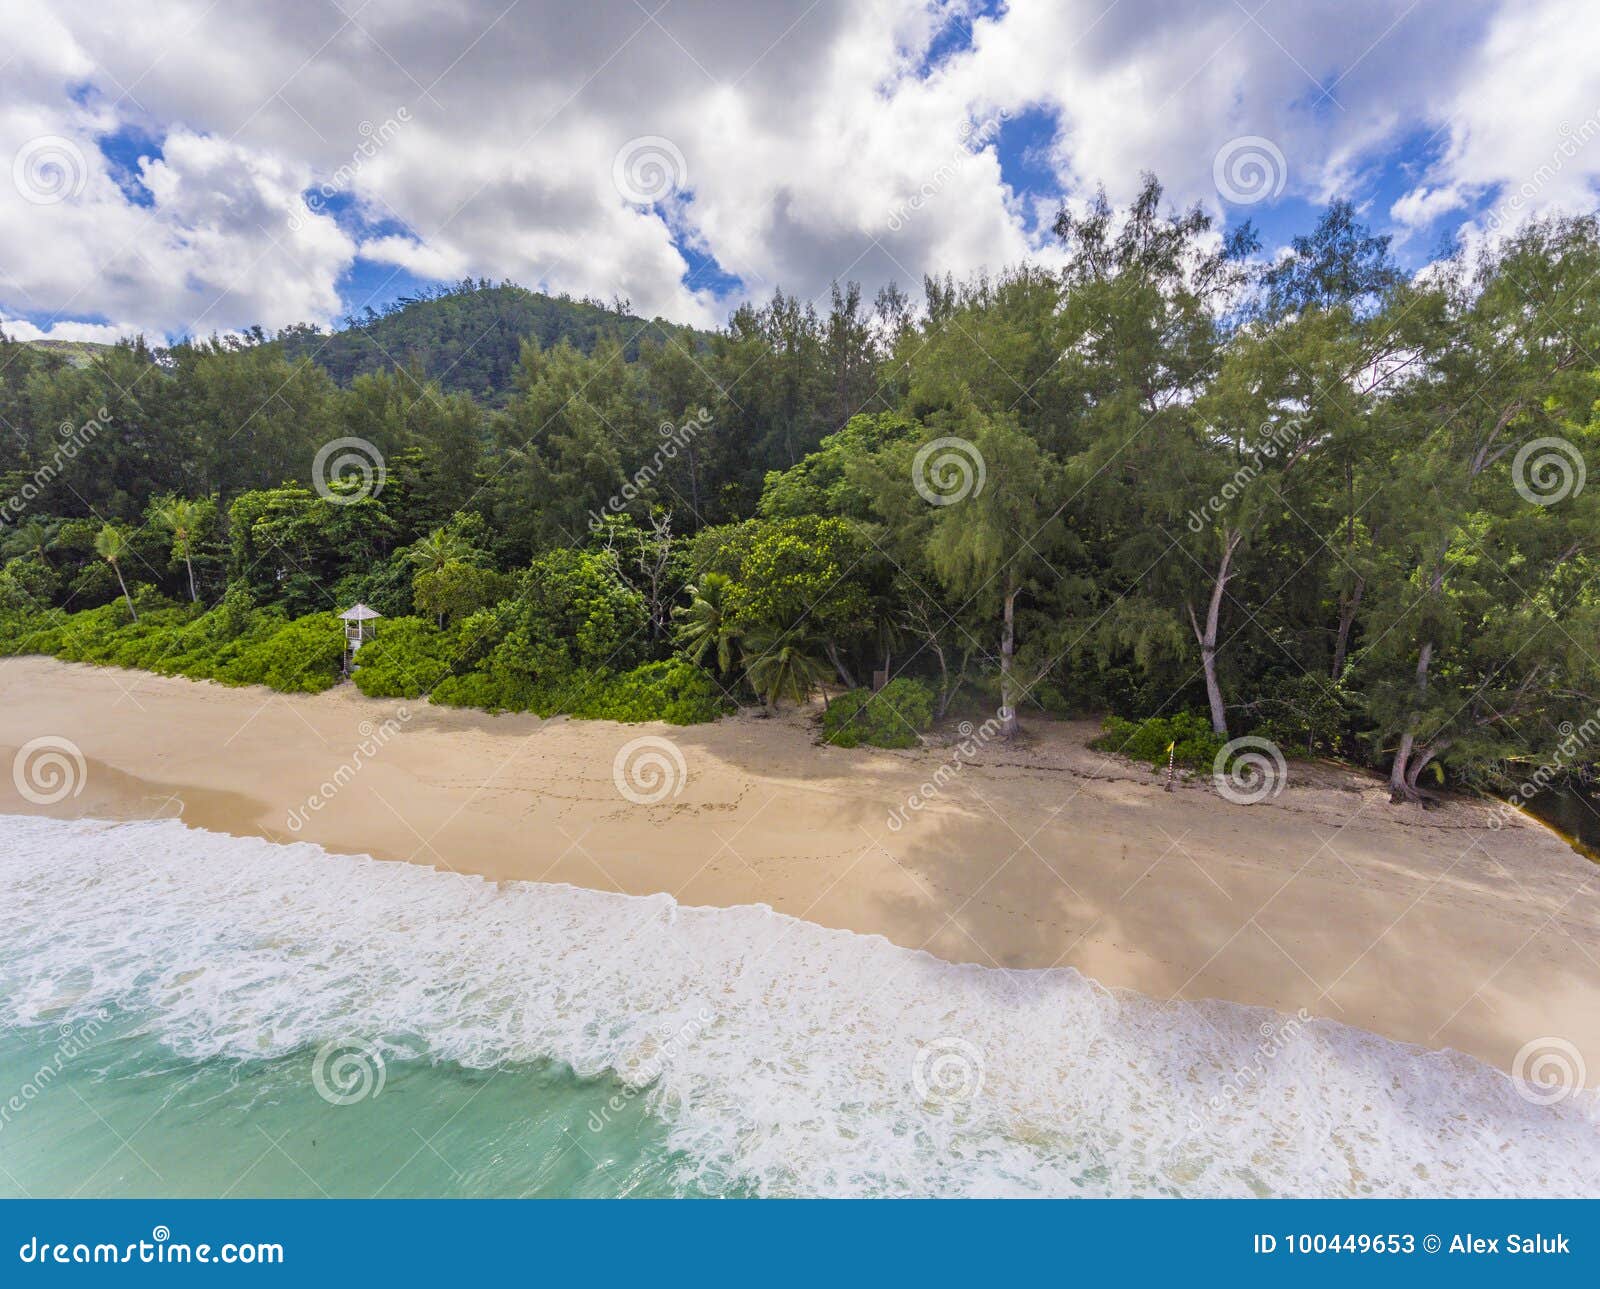 Anse Intendance stock image. Image of beach, calm, forest - 100449653